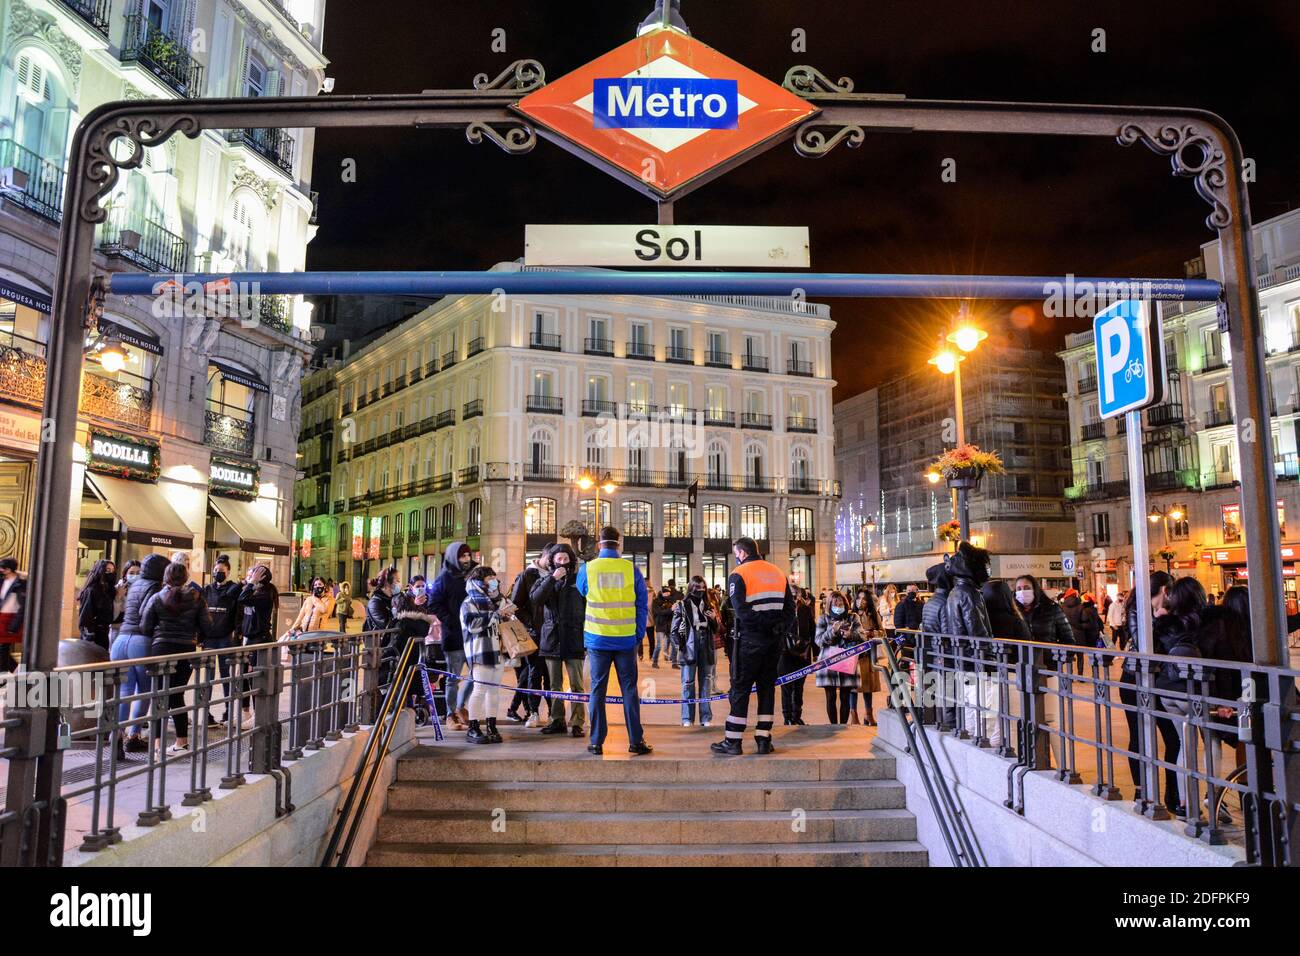 Madrid Metro operators monitor the access to Puerta del Sol Station, closed by excess of people in the central Puerta del Sol square in the capital of Spain.Restriction measures for access to Plaza de la Puerta del Sol in Madrid. The Madrid government has made the decision to monitor access to the busy Puerta del Sol square in Madrid after the covid-19 health crisis. Stock Photo